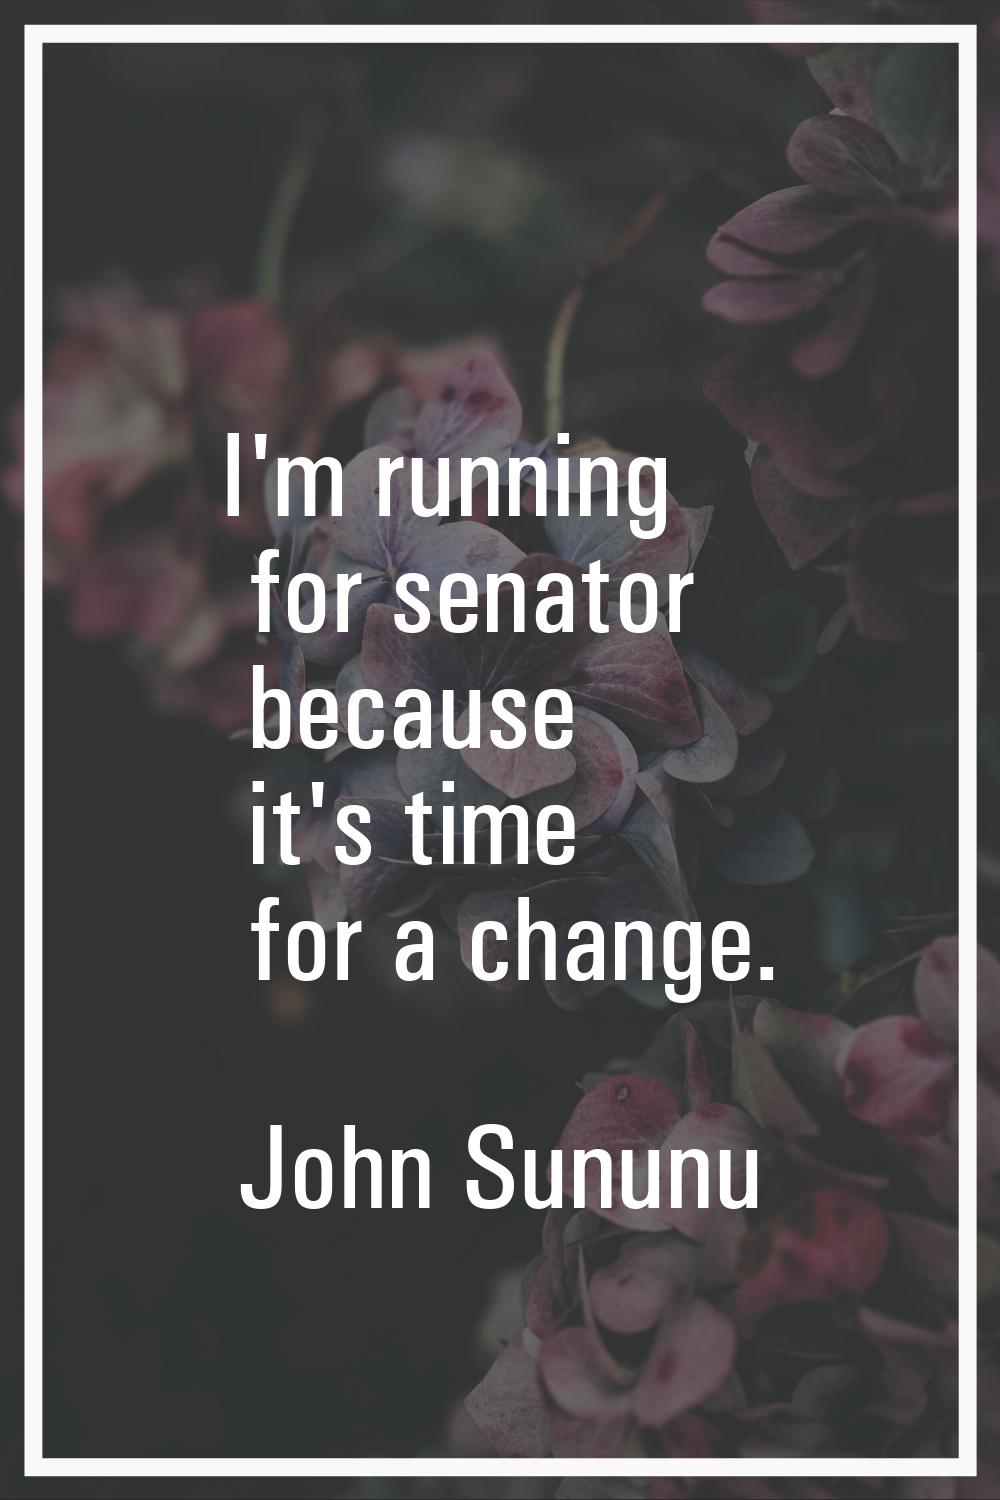 I'm running for senator because it's time for a change.